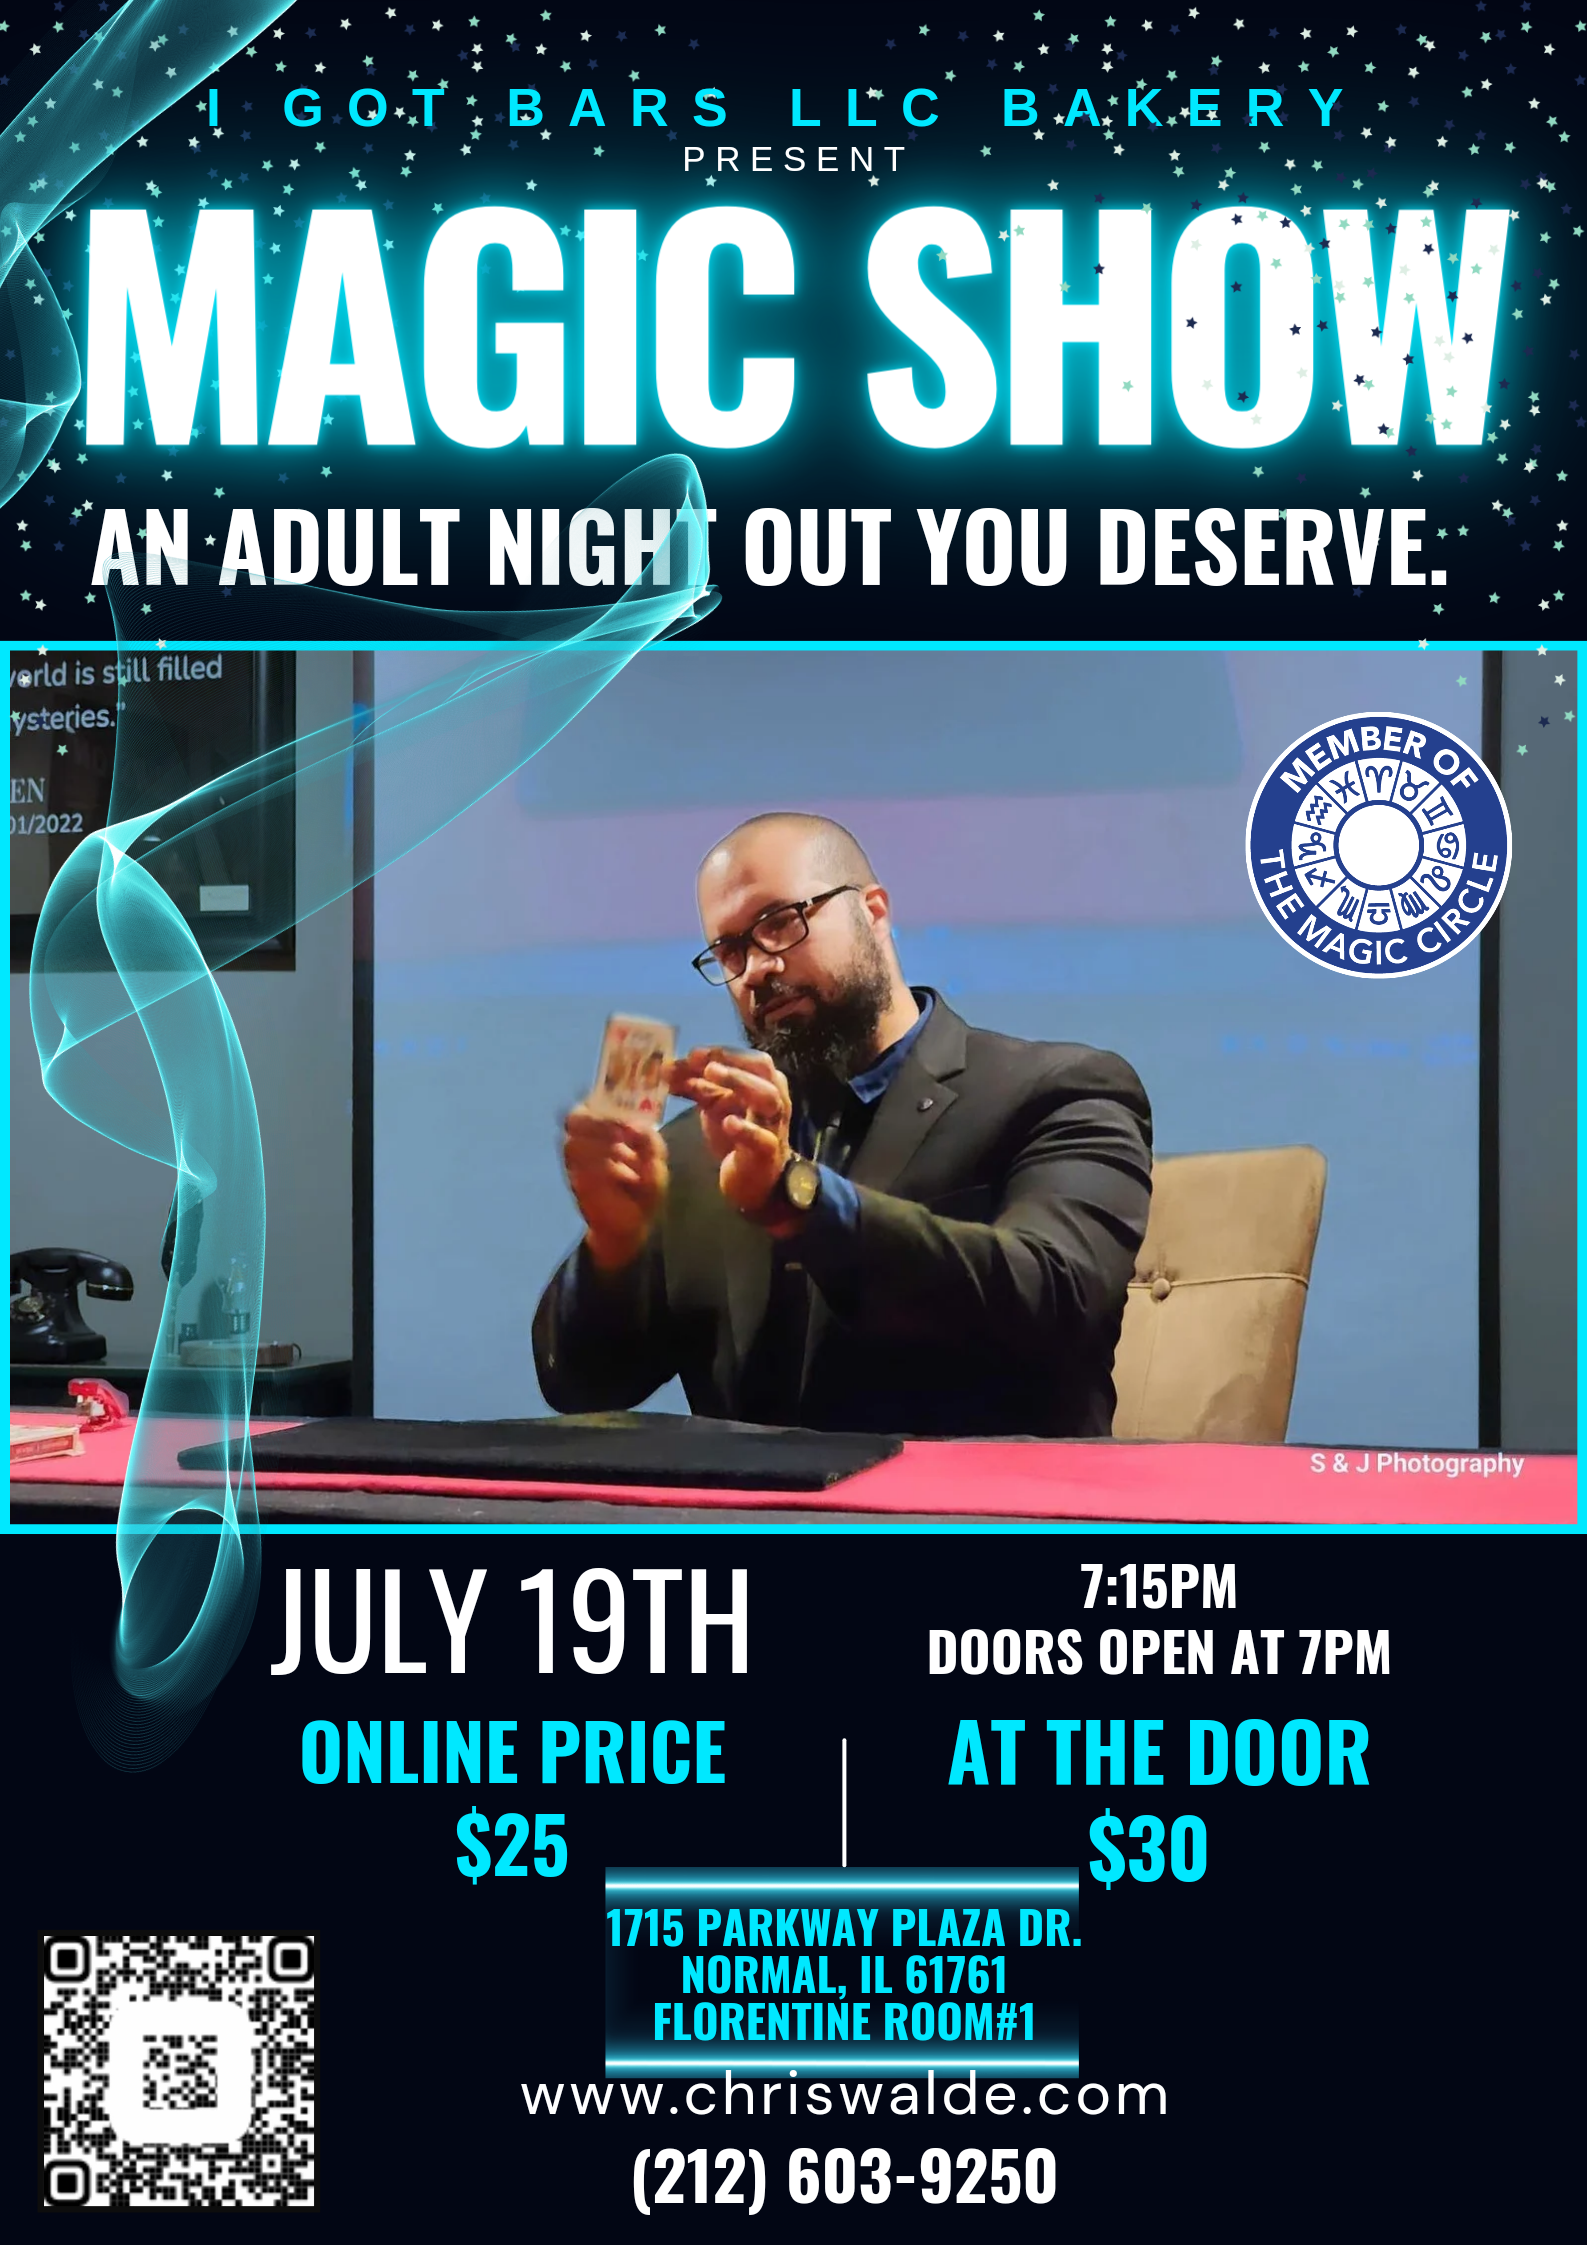 Magic Show, Adult Date Night with Wondrous Apparition Magic Hour